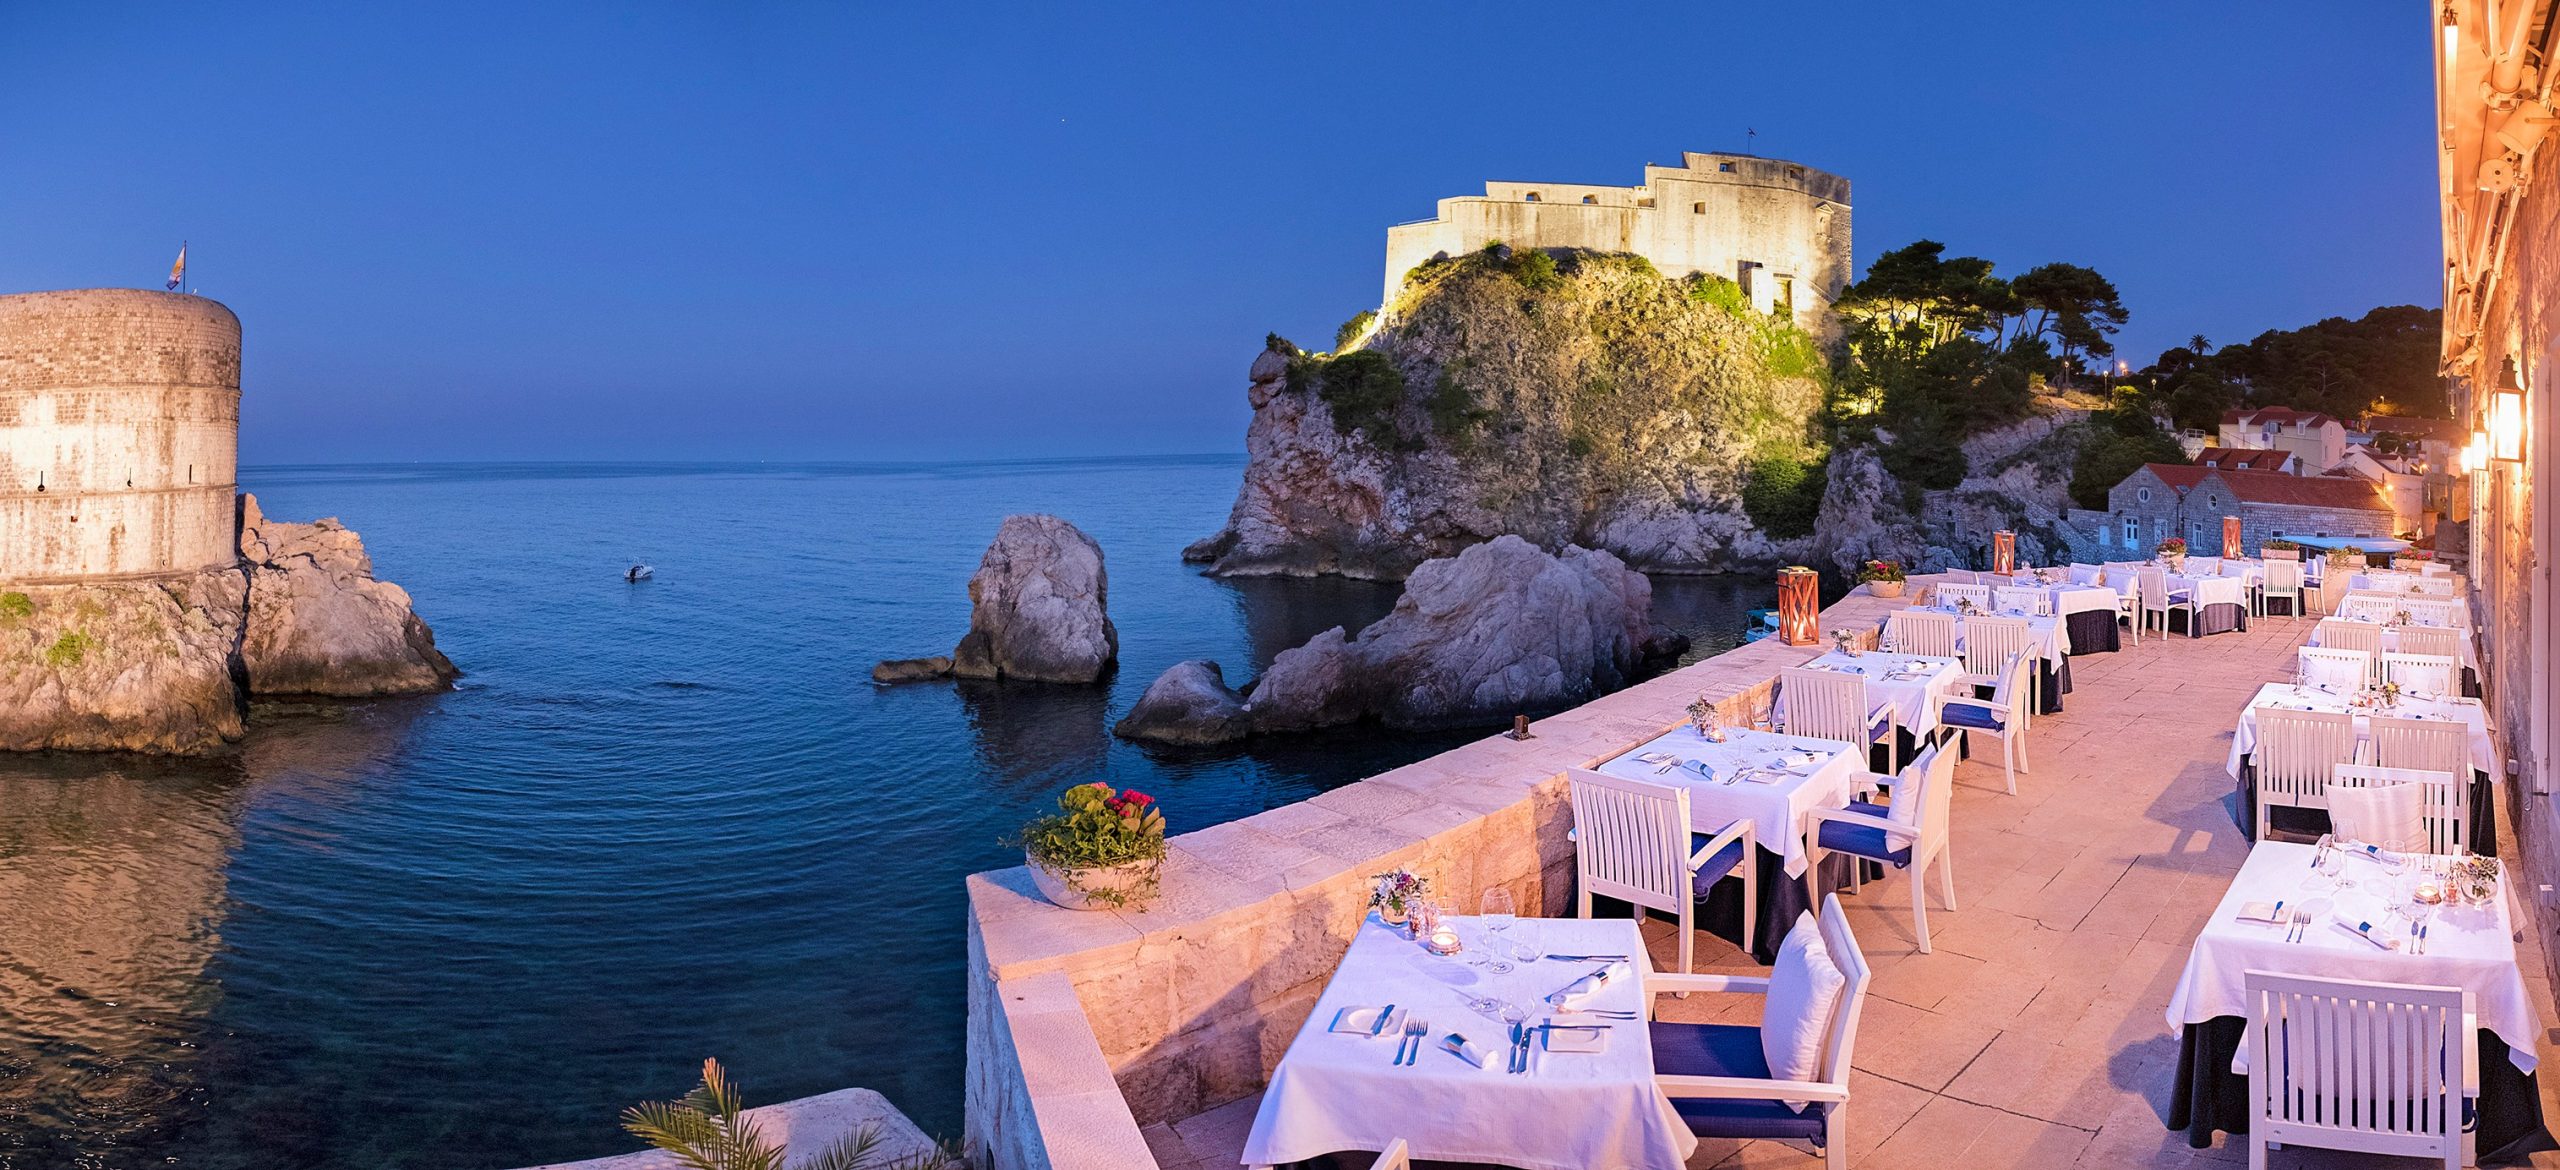 Croatian restaurant ranked 3rd most romantic in the world 